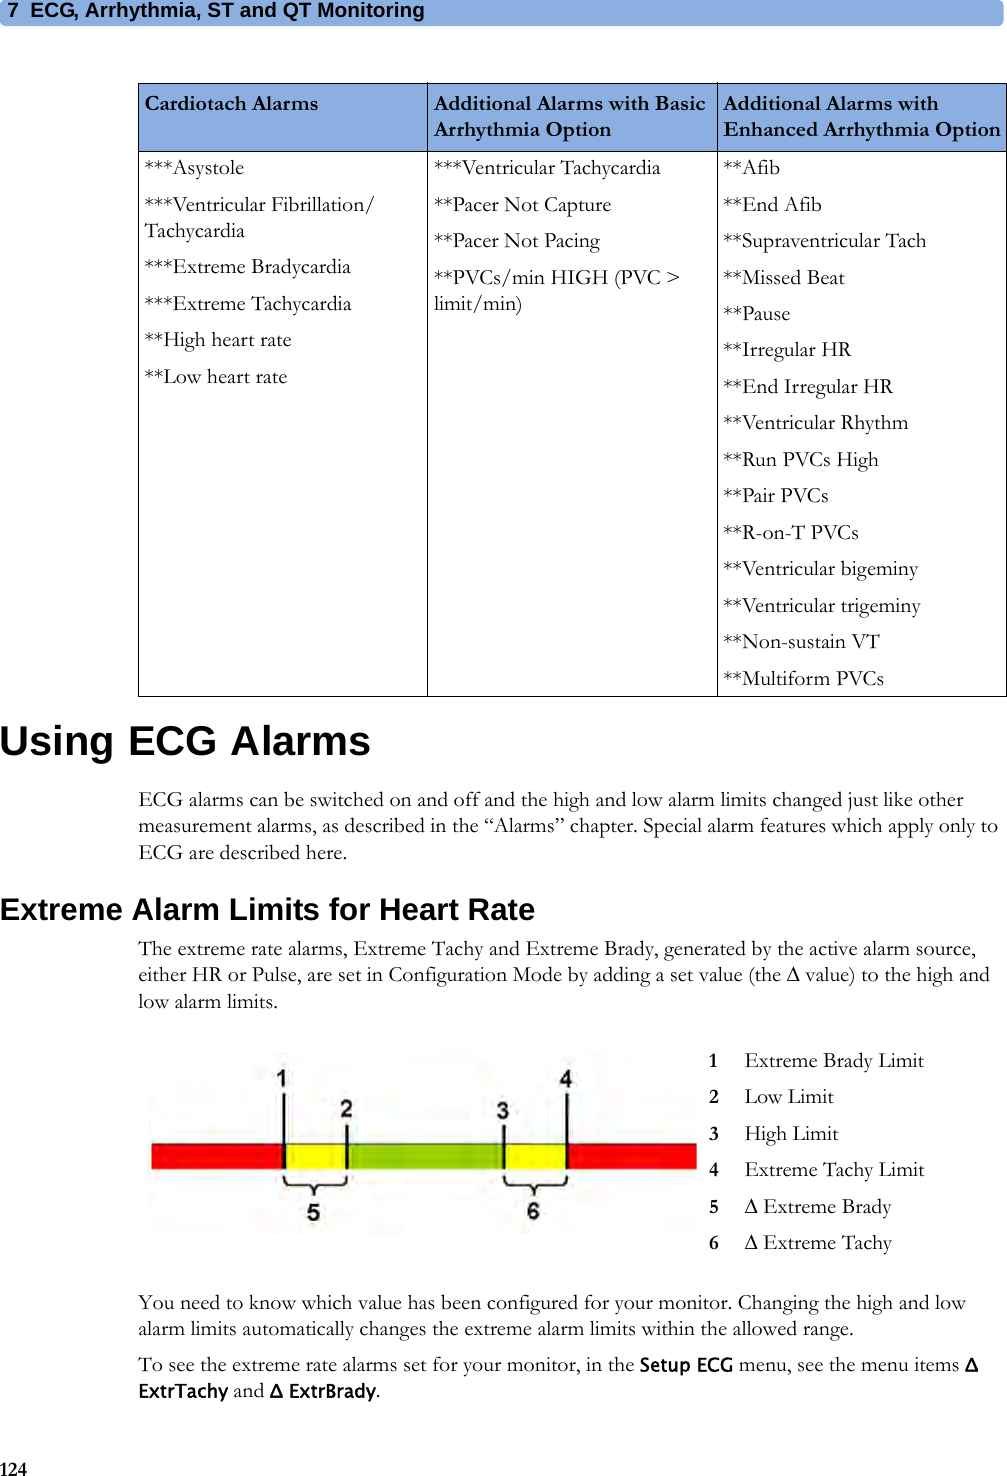 7 ECG, Arrhythmia, ST and QT Monitoring124Using ECG AlarmsECG alarms can be switched on and off and the high and low alarm limits changed just like other measurement alarms, as described in the “Alarms” chapter. Special alarm features which apply only to ECG are described here.Extreme Alarm Limits for Heart RateThe extreme rate alarms, Extreme Tachy and Extreme Brady, generated by the active alarm source, either HR or Pulse, are set in Configuration Mode by adding a set value (the  value) to the high and low alarm limits.You need to know which value has been configured for your monitor. Changing the high and low alarm limits automatically changes the extreme alarm limits within the allowed range.To see the extreme rate alarms set for your monitor, in the Setup ECG menu, see the menu items Δ ExtrTachy and Δ ExtrBrady.Cardiotach Alarms Additional Alarms with Basic Arrhythmia OptionAdditional Alarms with Enhanced Arrhythmia Option***Asystole***Ventricular Fibrillation/Tachycardia***Extreme Bradycardia***Extreme Tachycardia**High heart rate**Low heart rate***Ventricular Tachycardia**Pacer Not Capture**Pacer Not Pacing**PVCs/min HIGH (PVC &gt; limit/min)**Afib**End Afib**Supraventricular Tach**Missed Beat**Pause**Irregular HR**End Irregular HR**Ventricular Rhythm**Run PVCs High**Pair PVCs**R-on-T PVCs**Ventricular bigeminy**Ventricular trigeminy**Non-sustain VT**Multiform PVCs1Extreme Brady Limit2Low Limit3High Limit4Extreme Tachy Limit5 Extreme Brady6Extreme Tachy